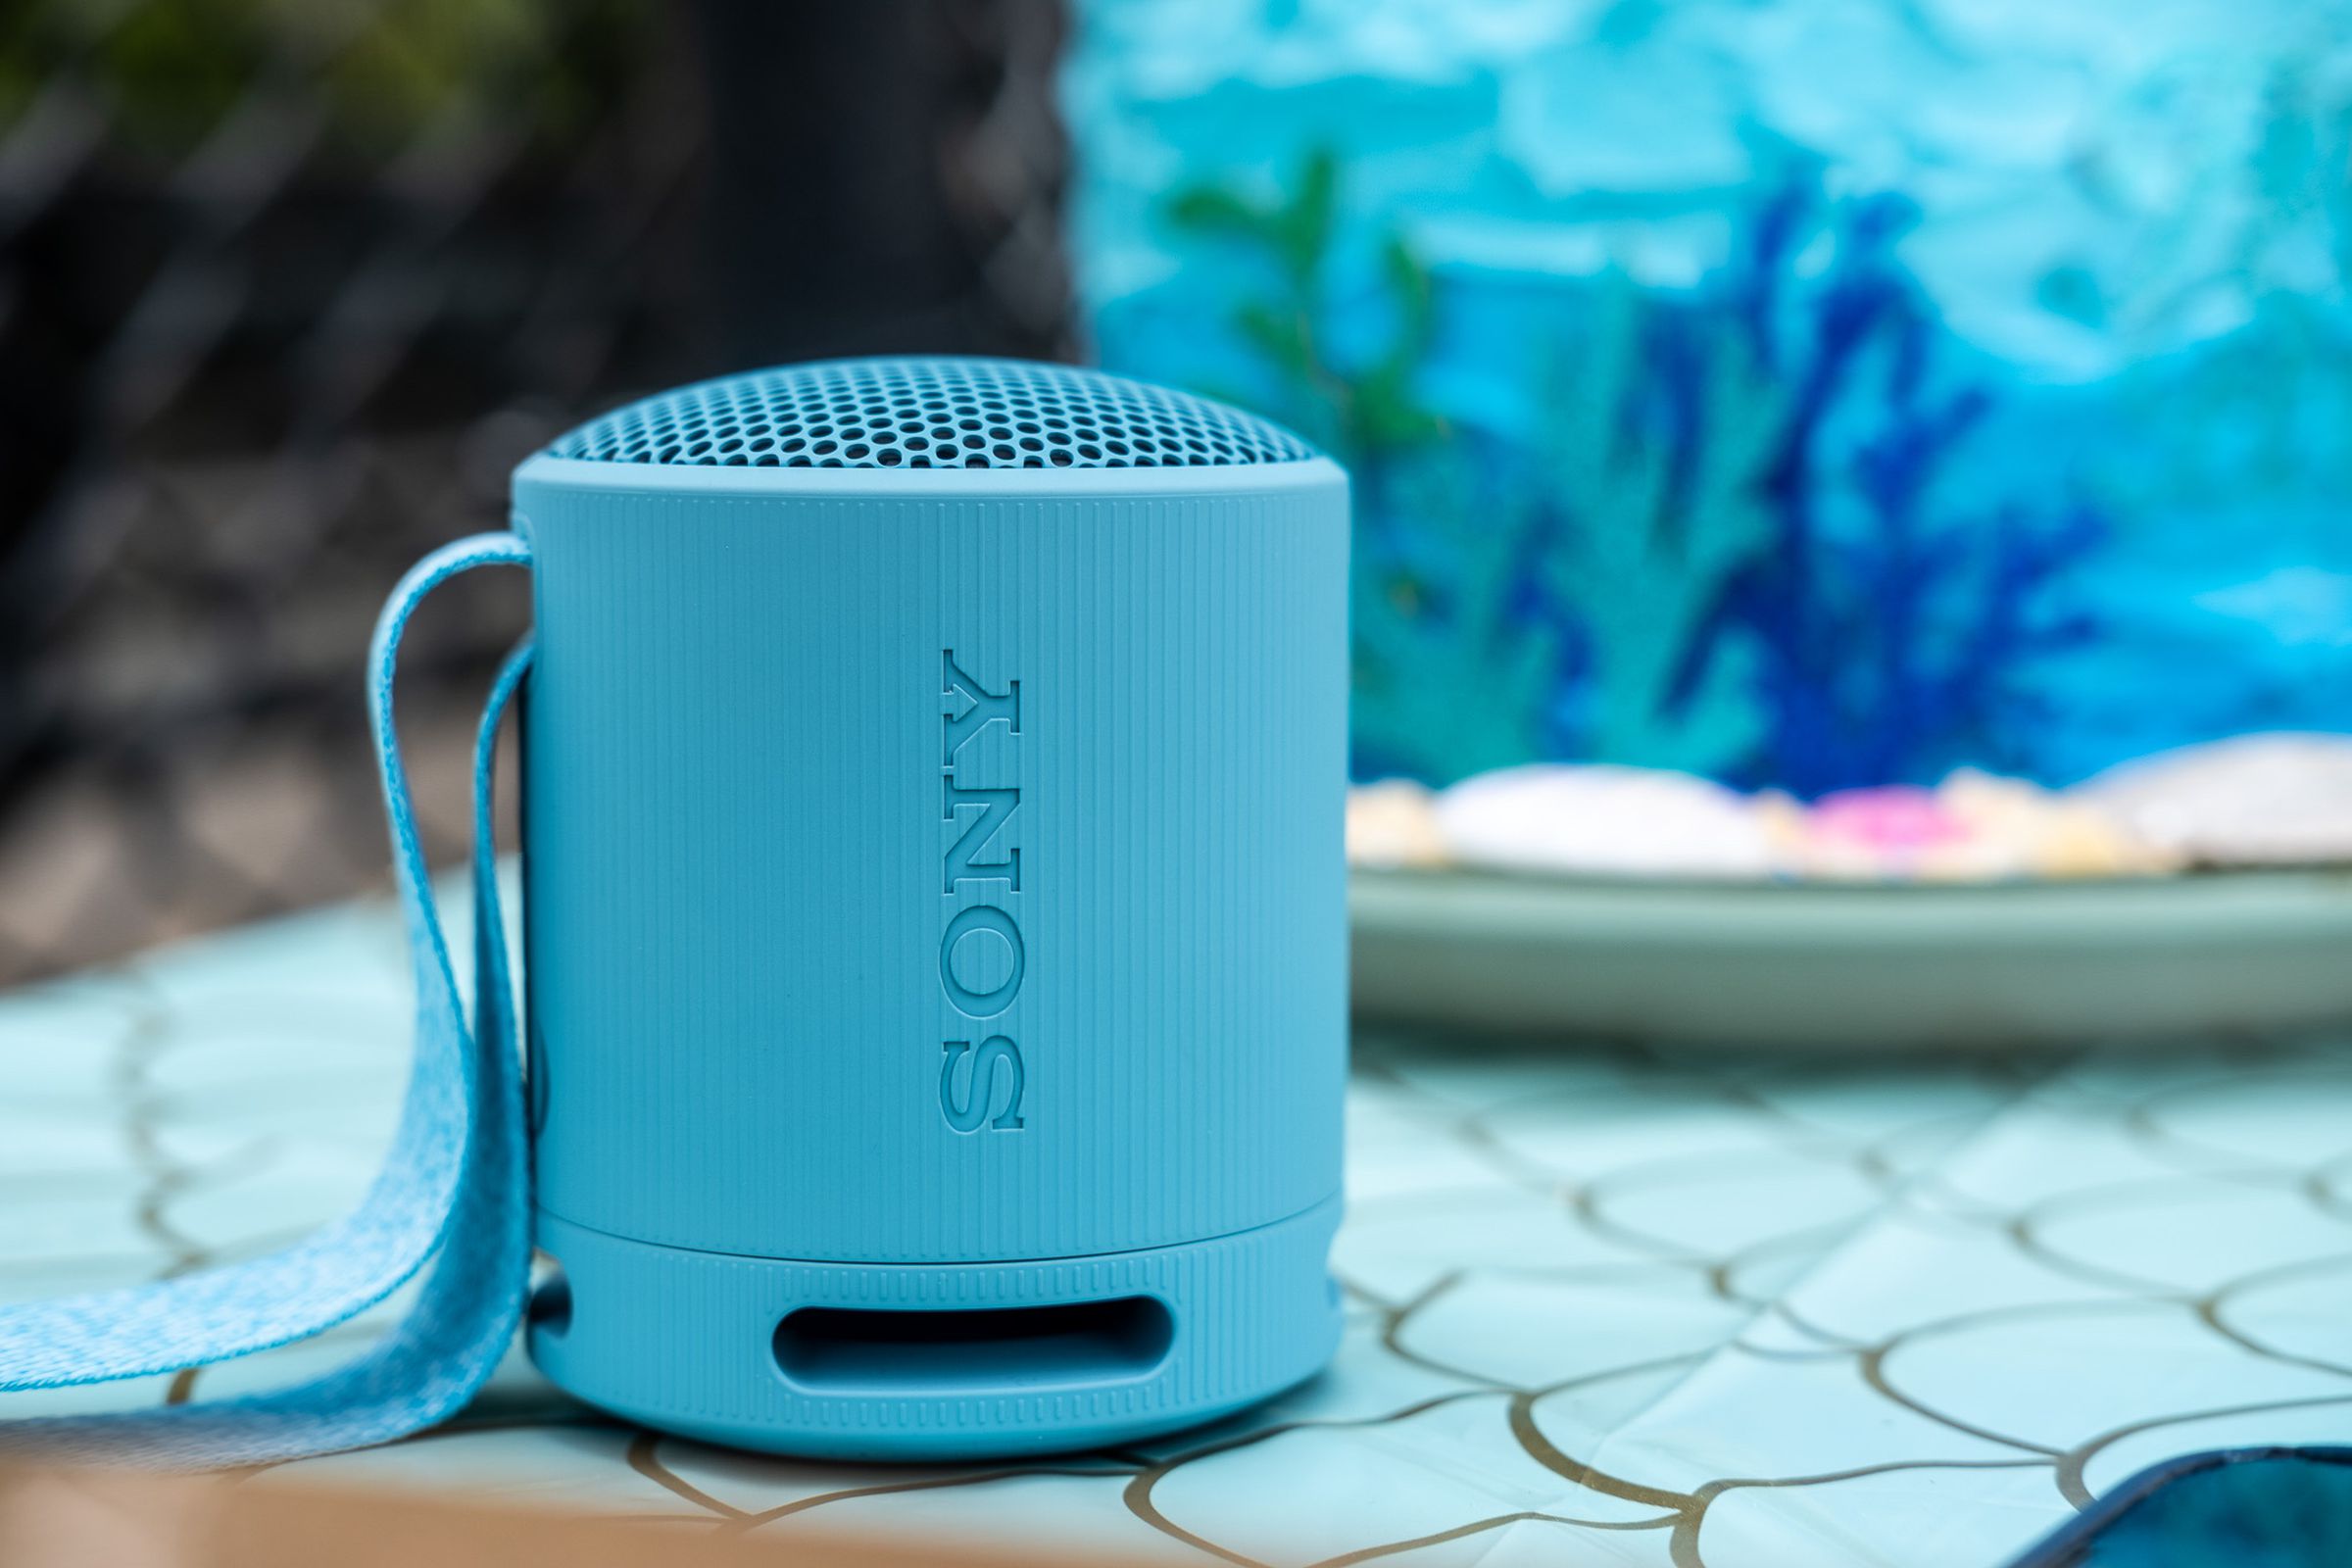 A photo of Sony’s compact SRS-XB100 Bluetooth speaker.